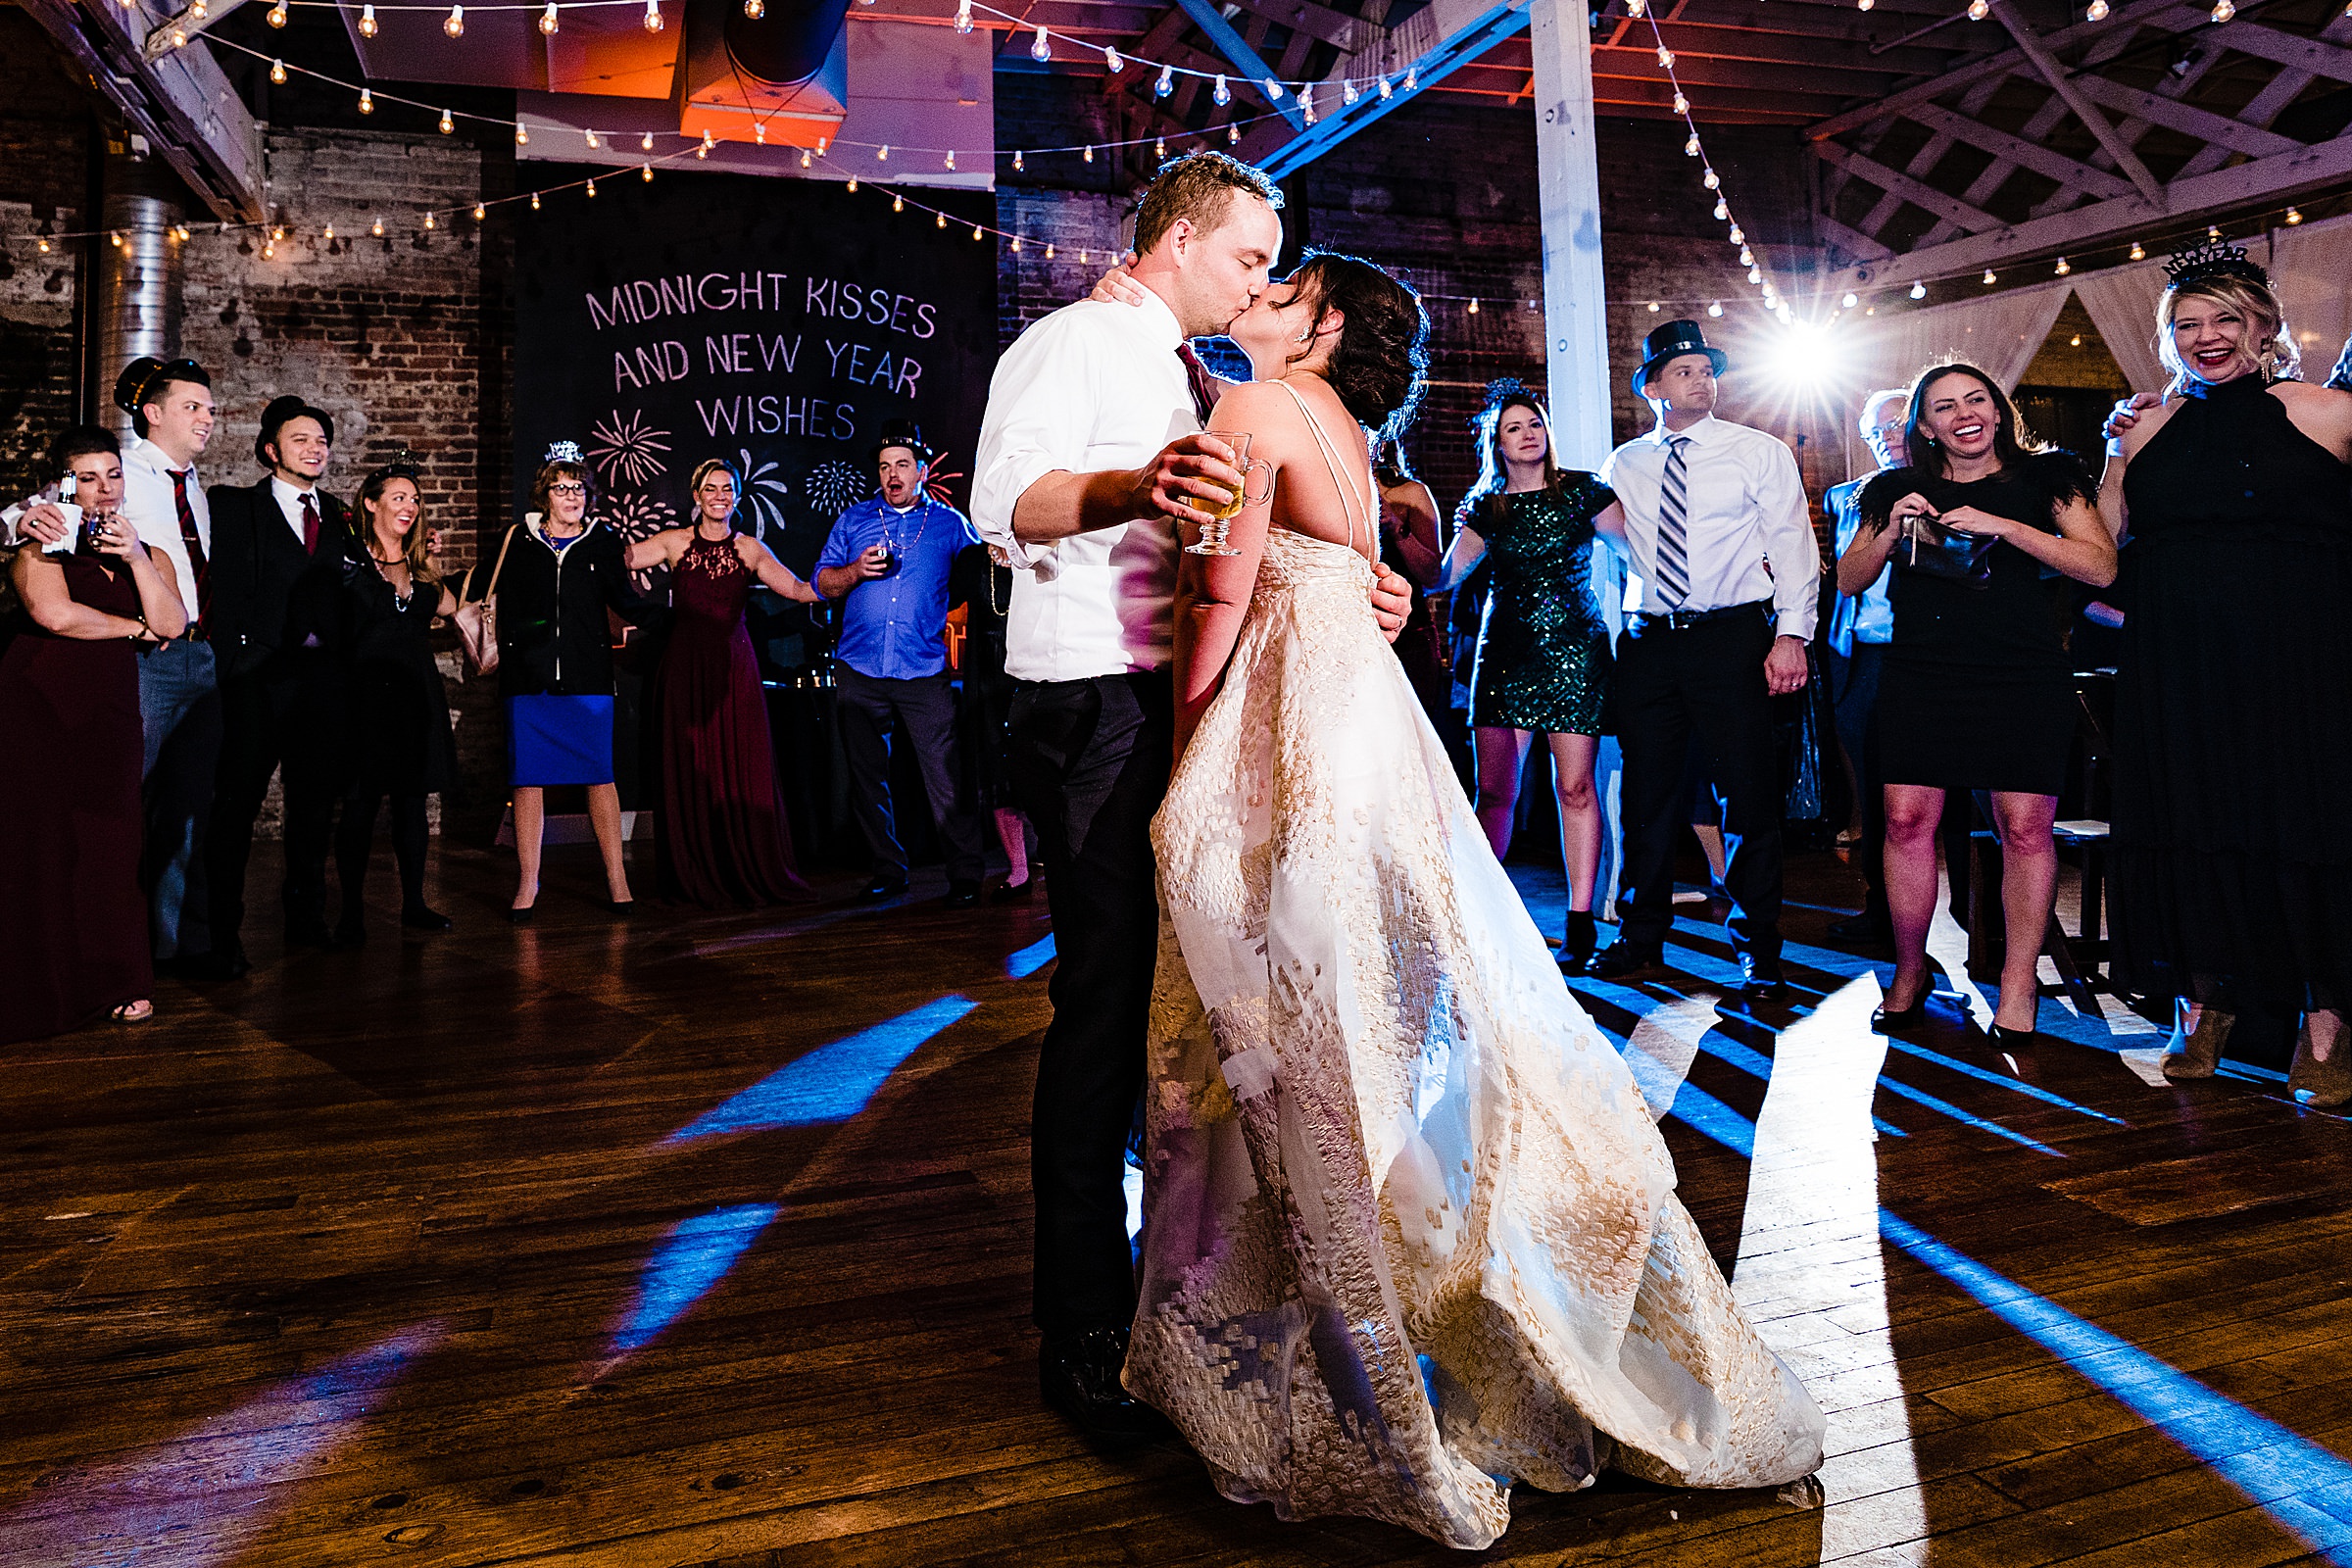 Bride and groom kiss at midnight during their New Year's Eve wedding at the Stockroom in Raleigh, North Carolina. The bride is in a white and gold dress, and the groom is in a suit but has taken his jacket off. | kivusandcamera.com